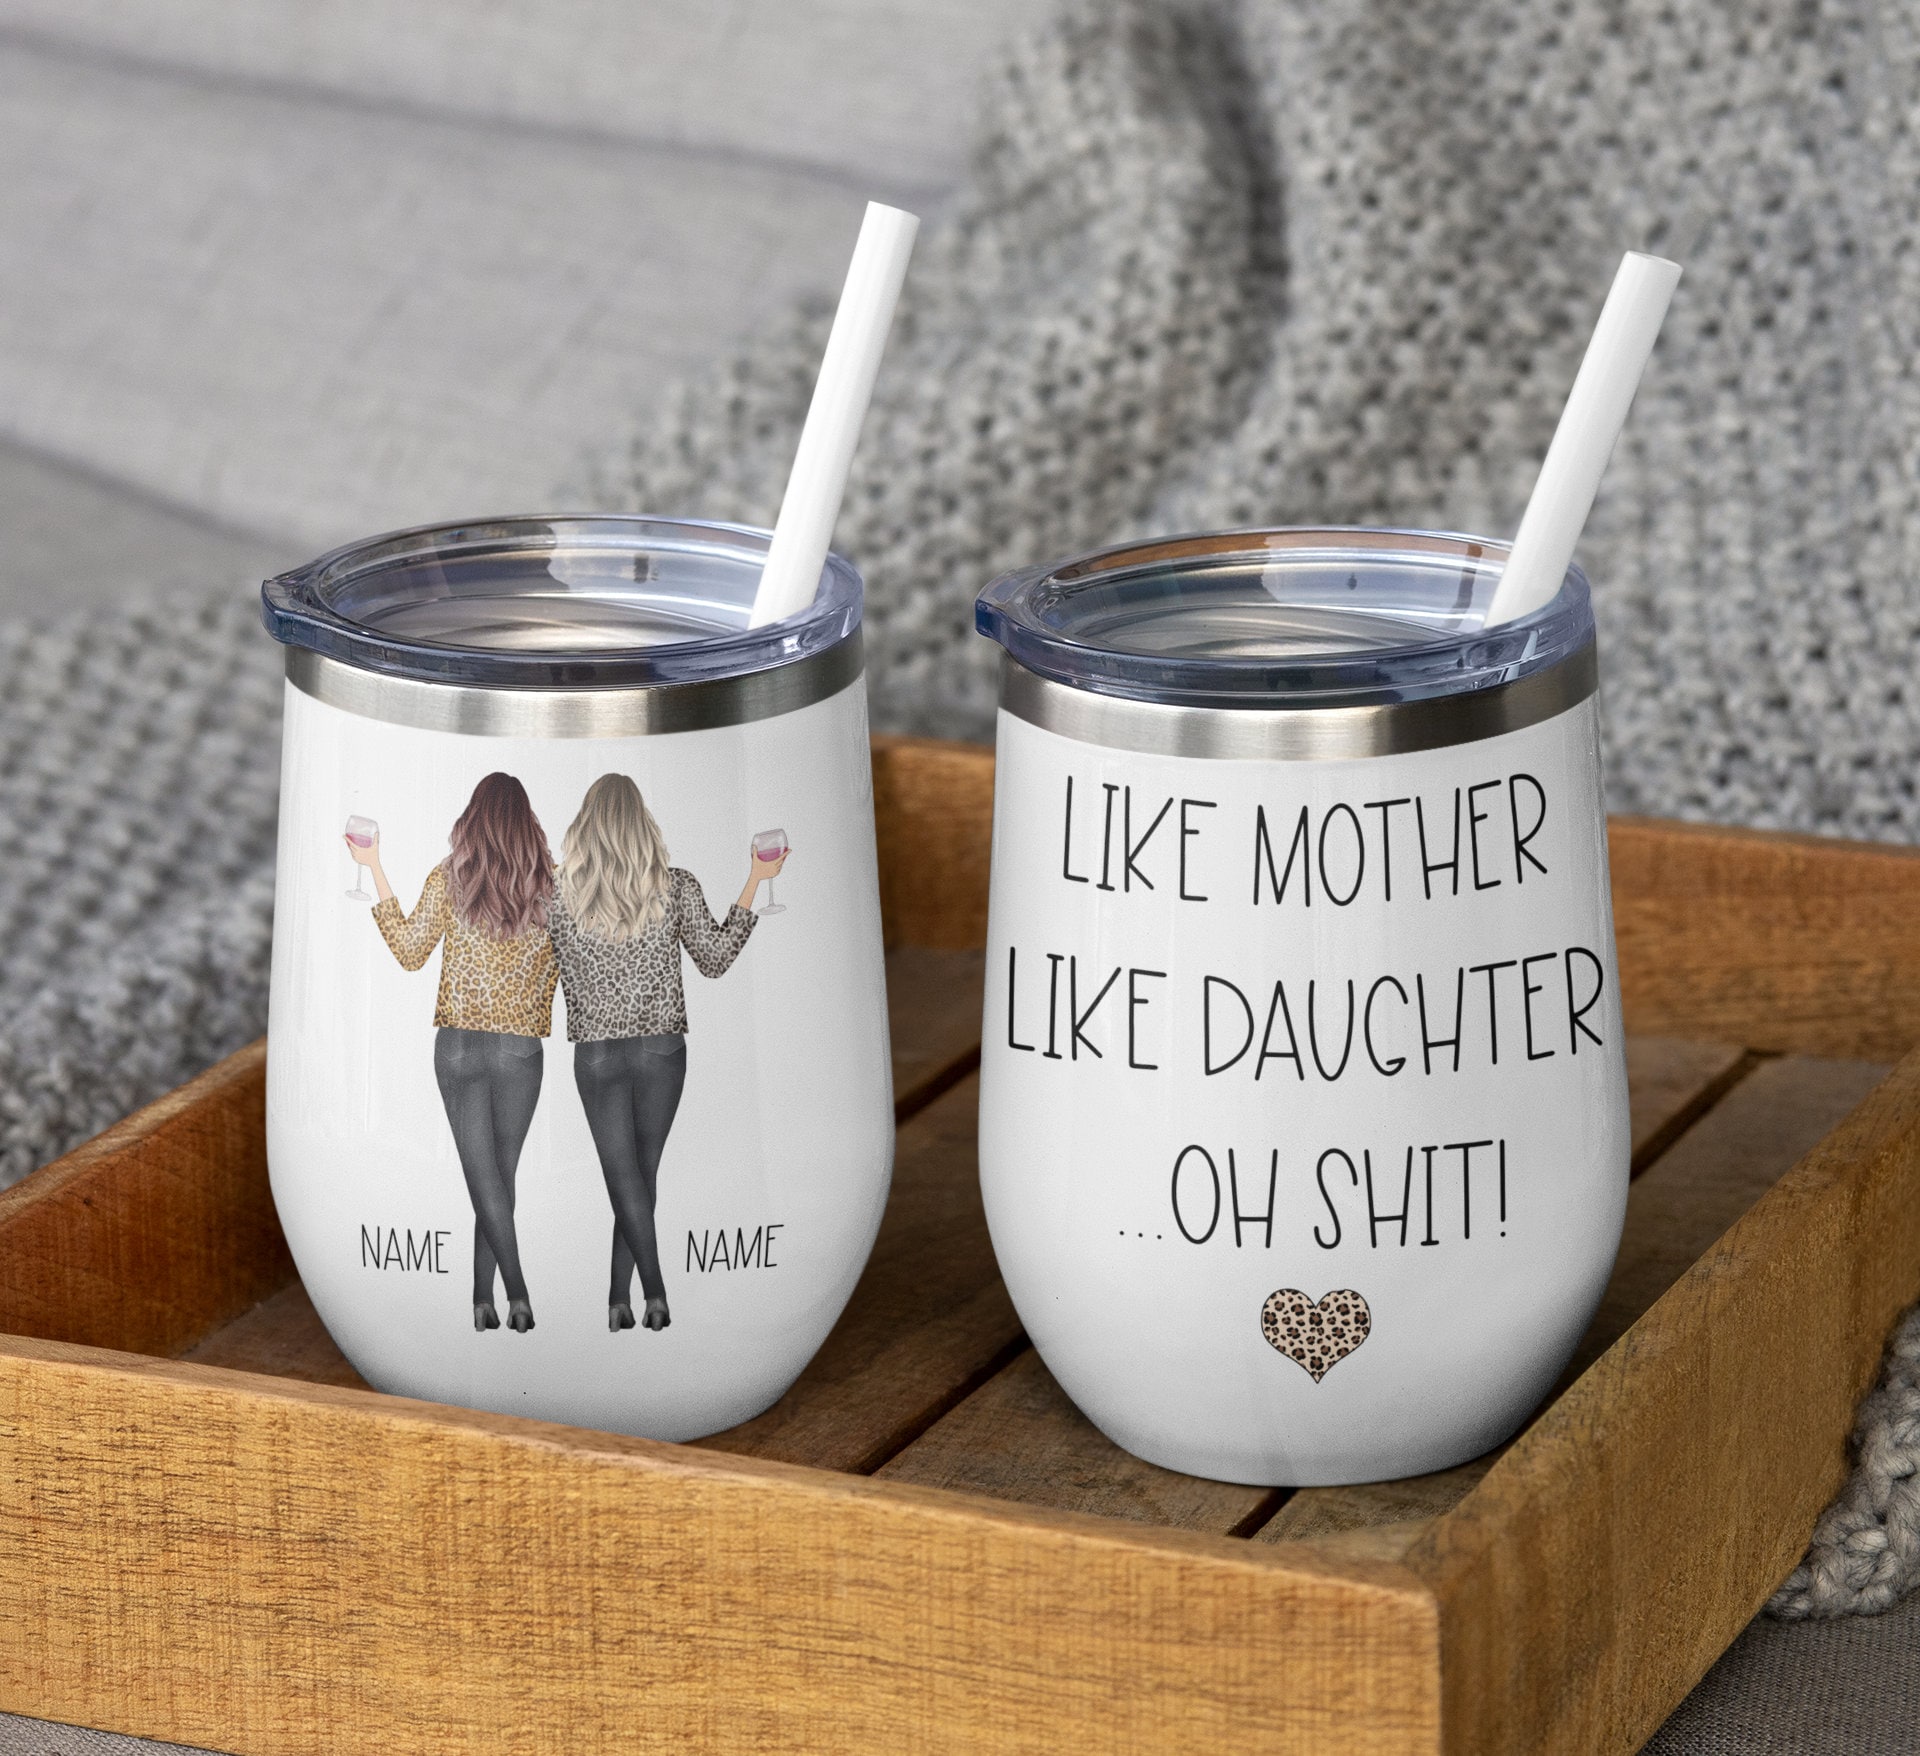 LEJIAJINW Daughter Gift from Mom - Daughter Gifts, Gifts for Daughters from  Mothers - Christmas Birthday Gifts for Dadughter from Mom - Adult Daughter